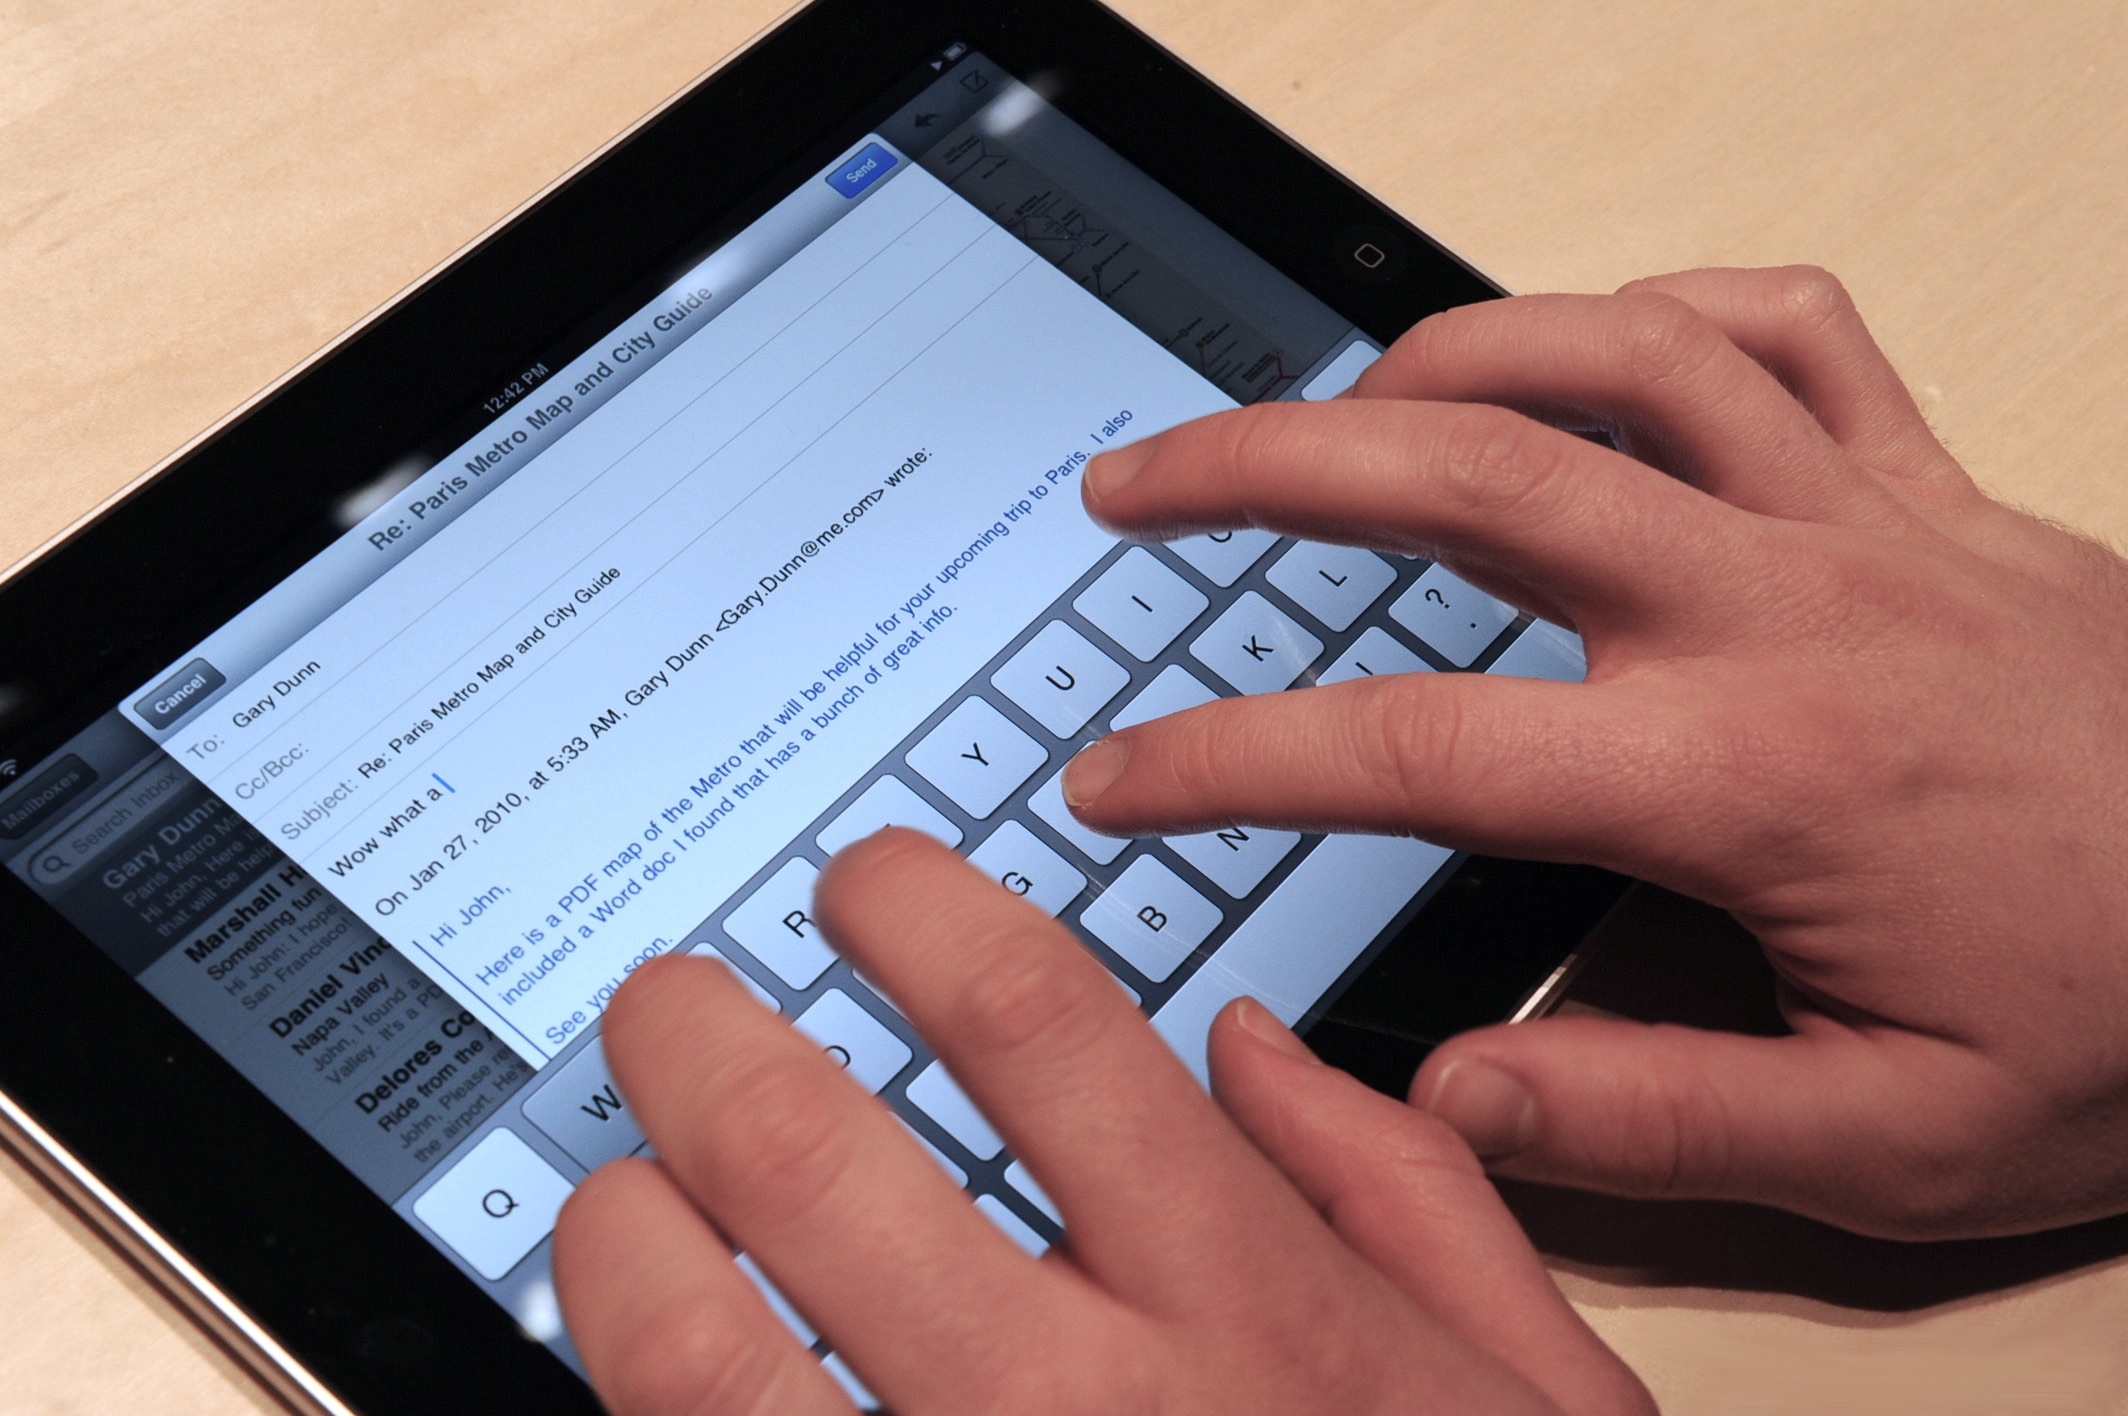 A virtual keyboard will appear on your screen
Use the virtual keyboard to type numbers